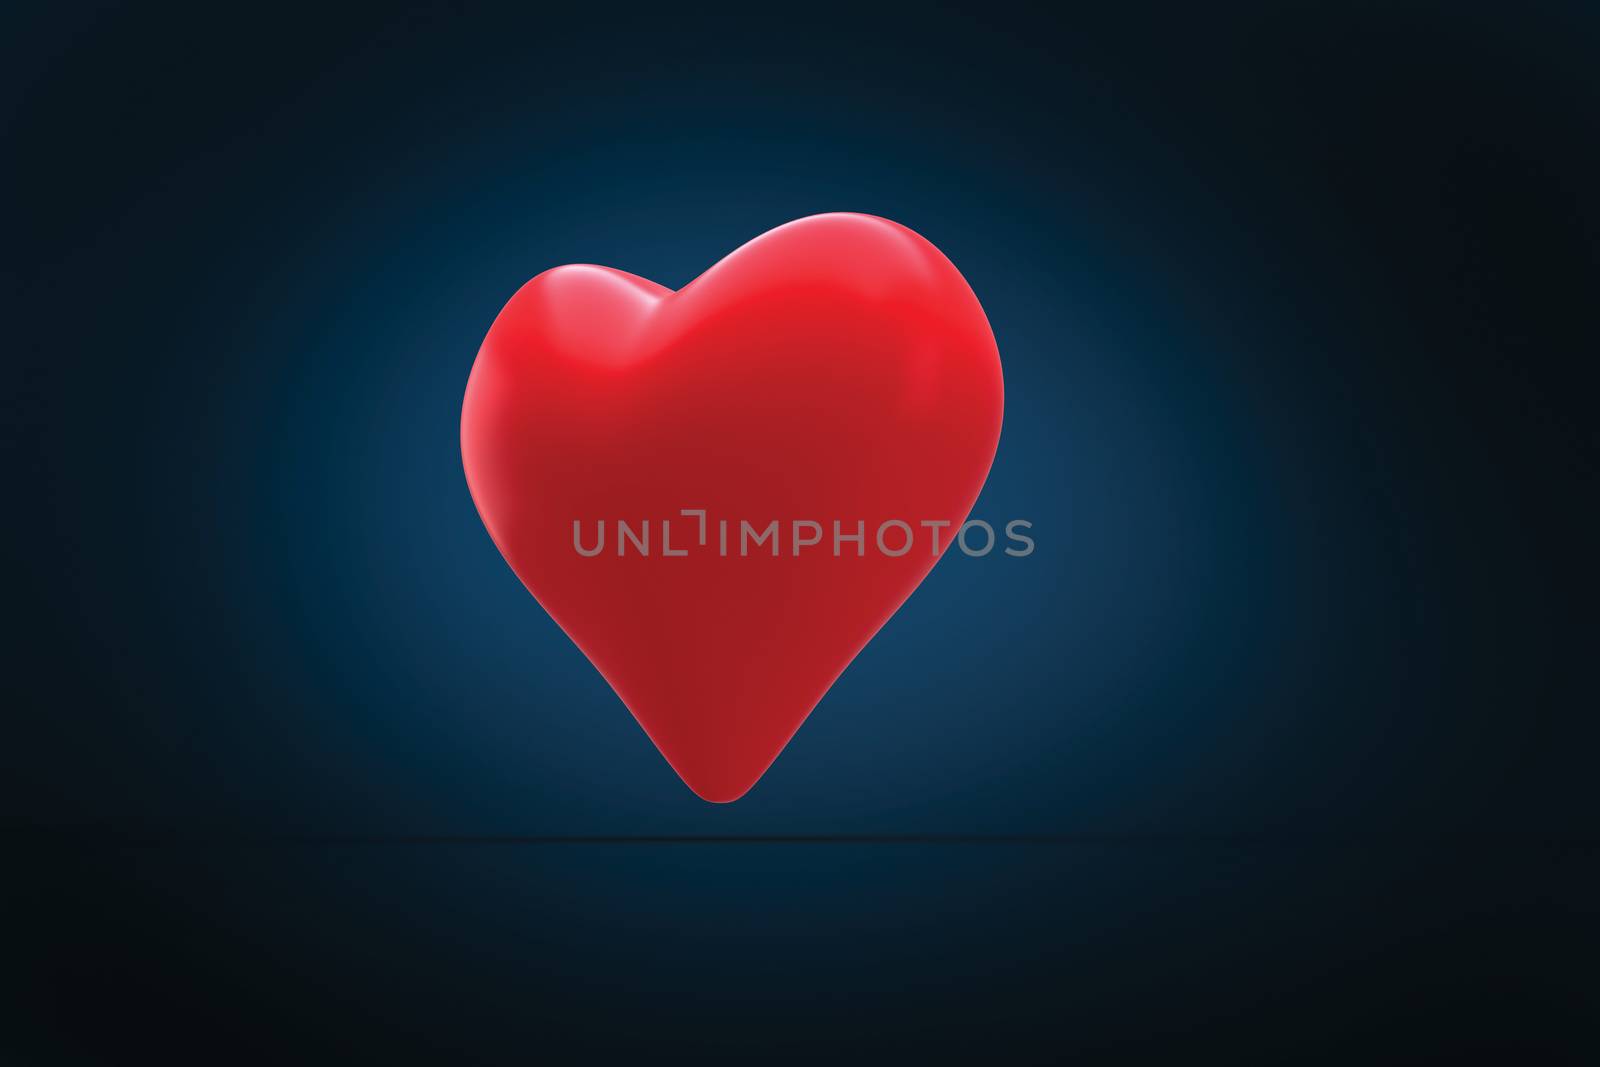 Red heart against blue background with vignette